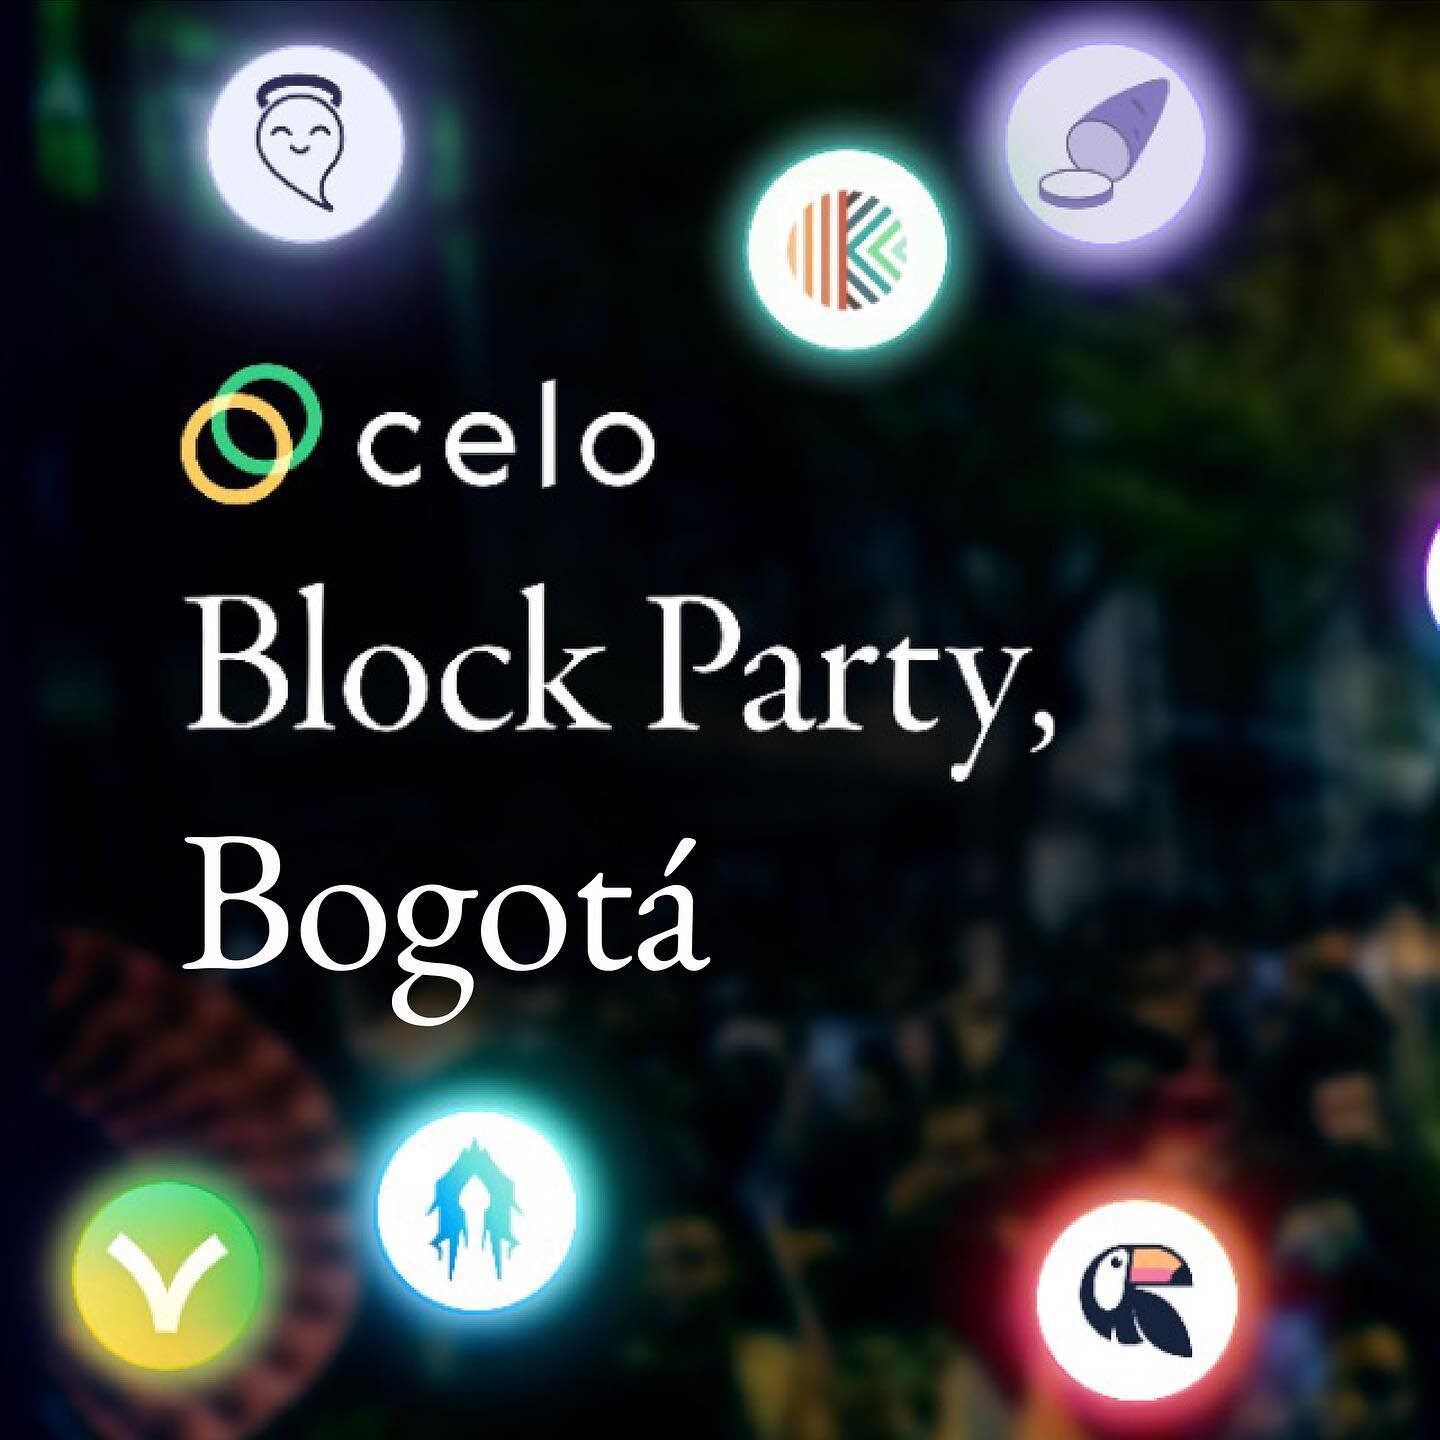 To attend, just register for the Celo Block Party https://eventbrite.com/e/celo-block-party-tickets-461545092797. Head to the gathering and show your ticket [via mobile] at the door. Every guest will receive NEW Celo swag for attending! Find addition